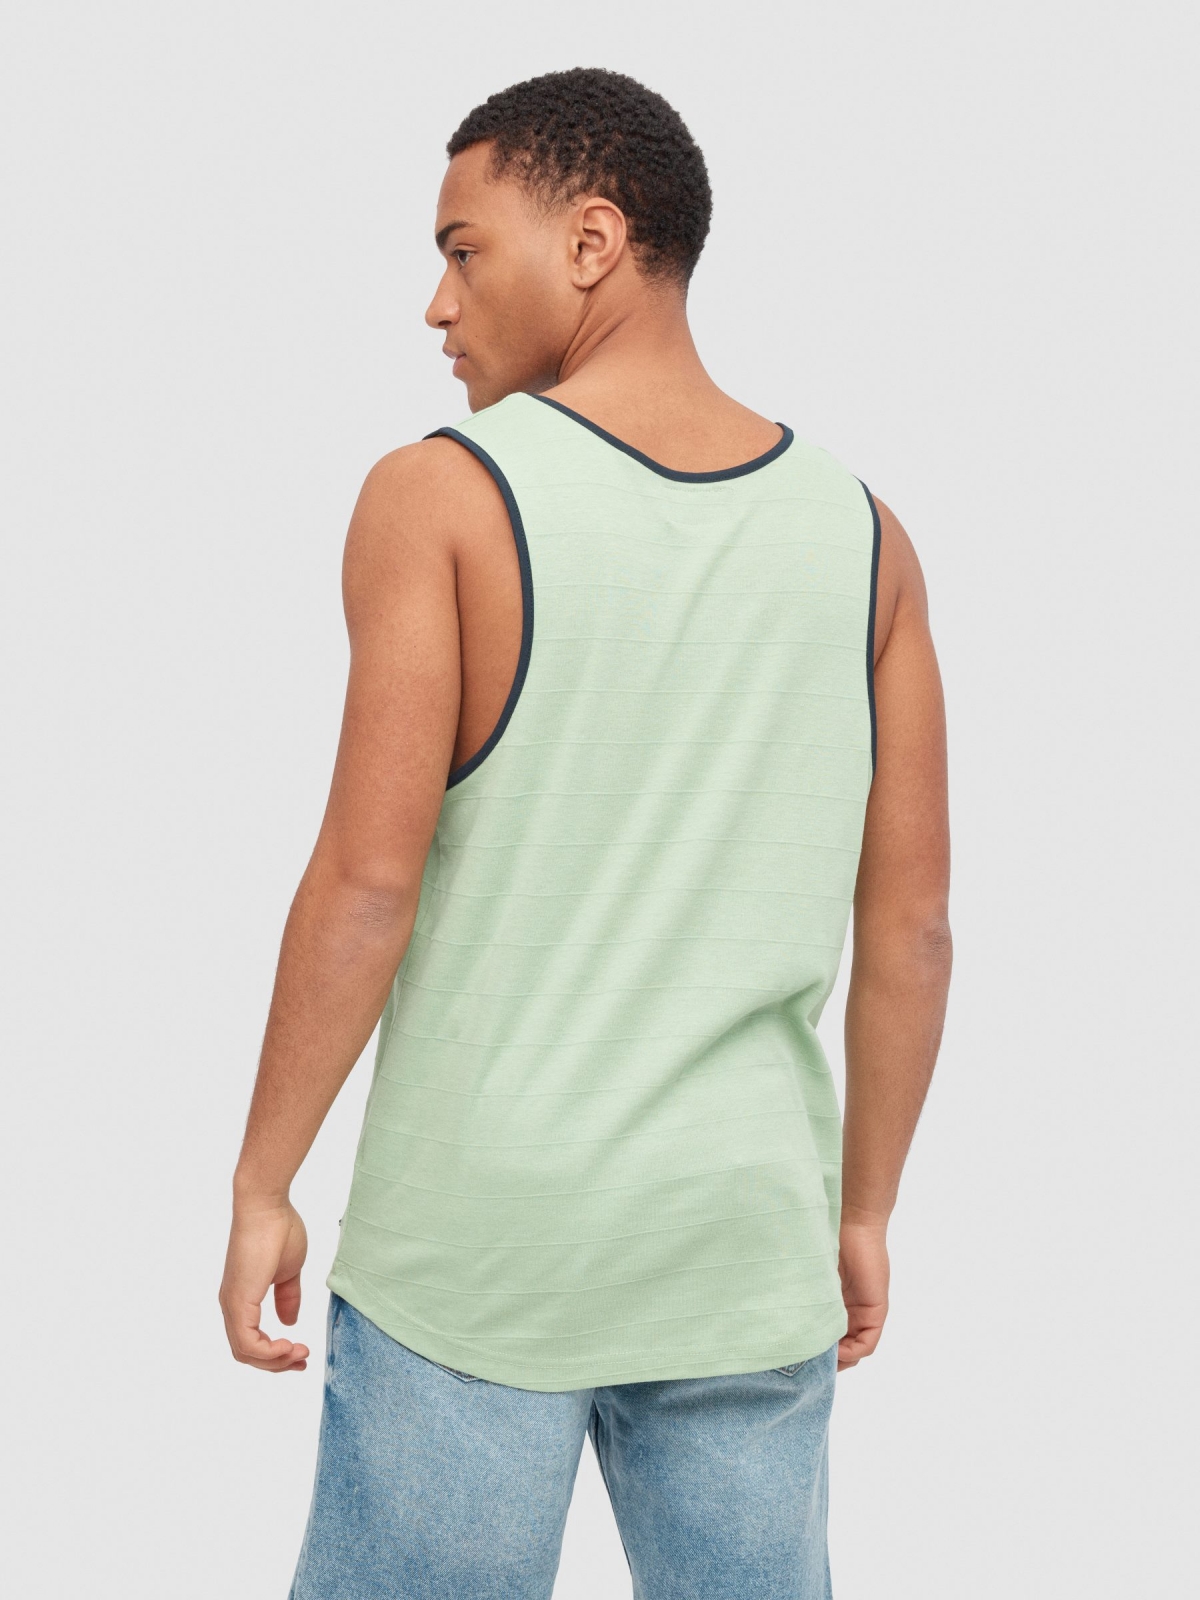 Striped T-shirt with pocket mint middle back view